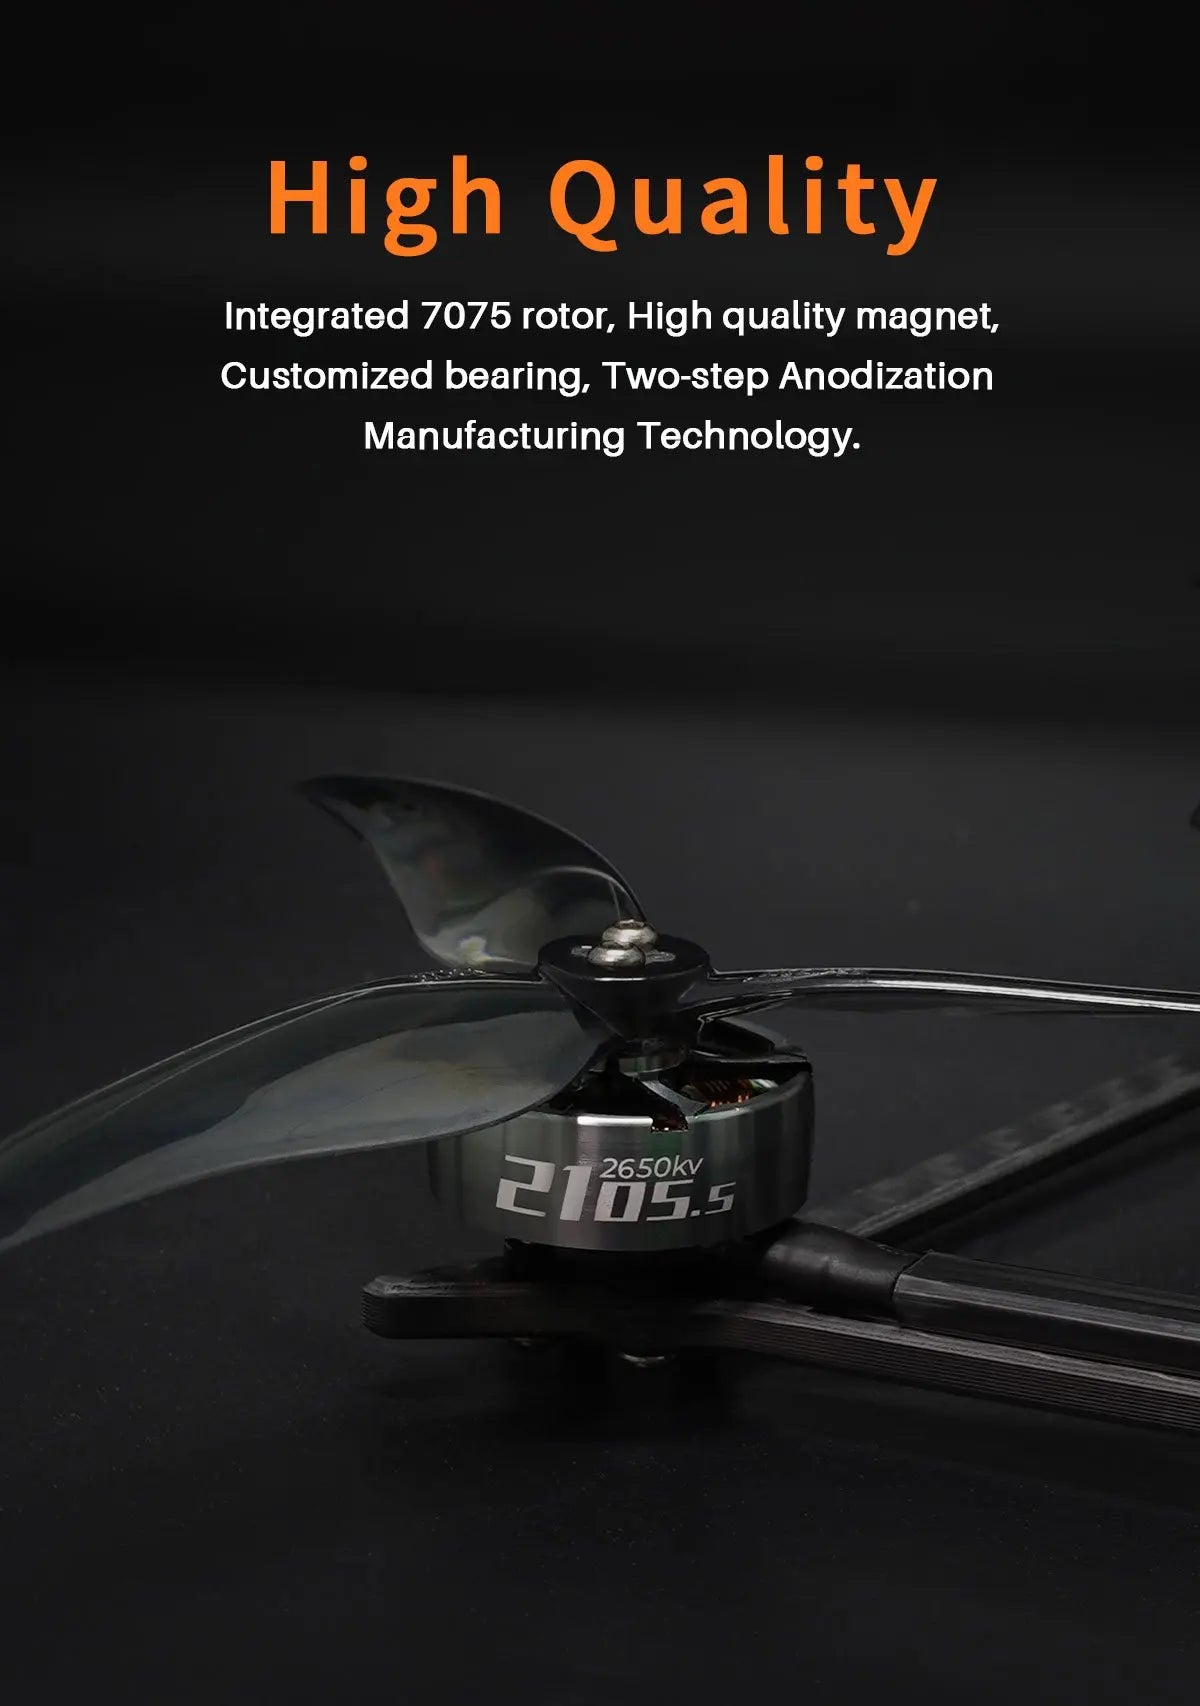 GEPRC SPEEDX2 Motor, High Quality Integrated 7075 rotor, High quality magnet; Customized bearing; Two